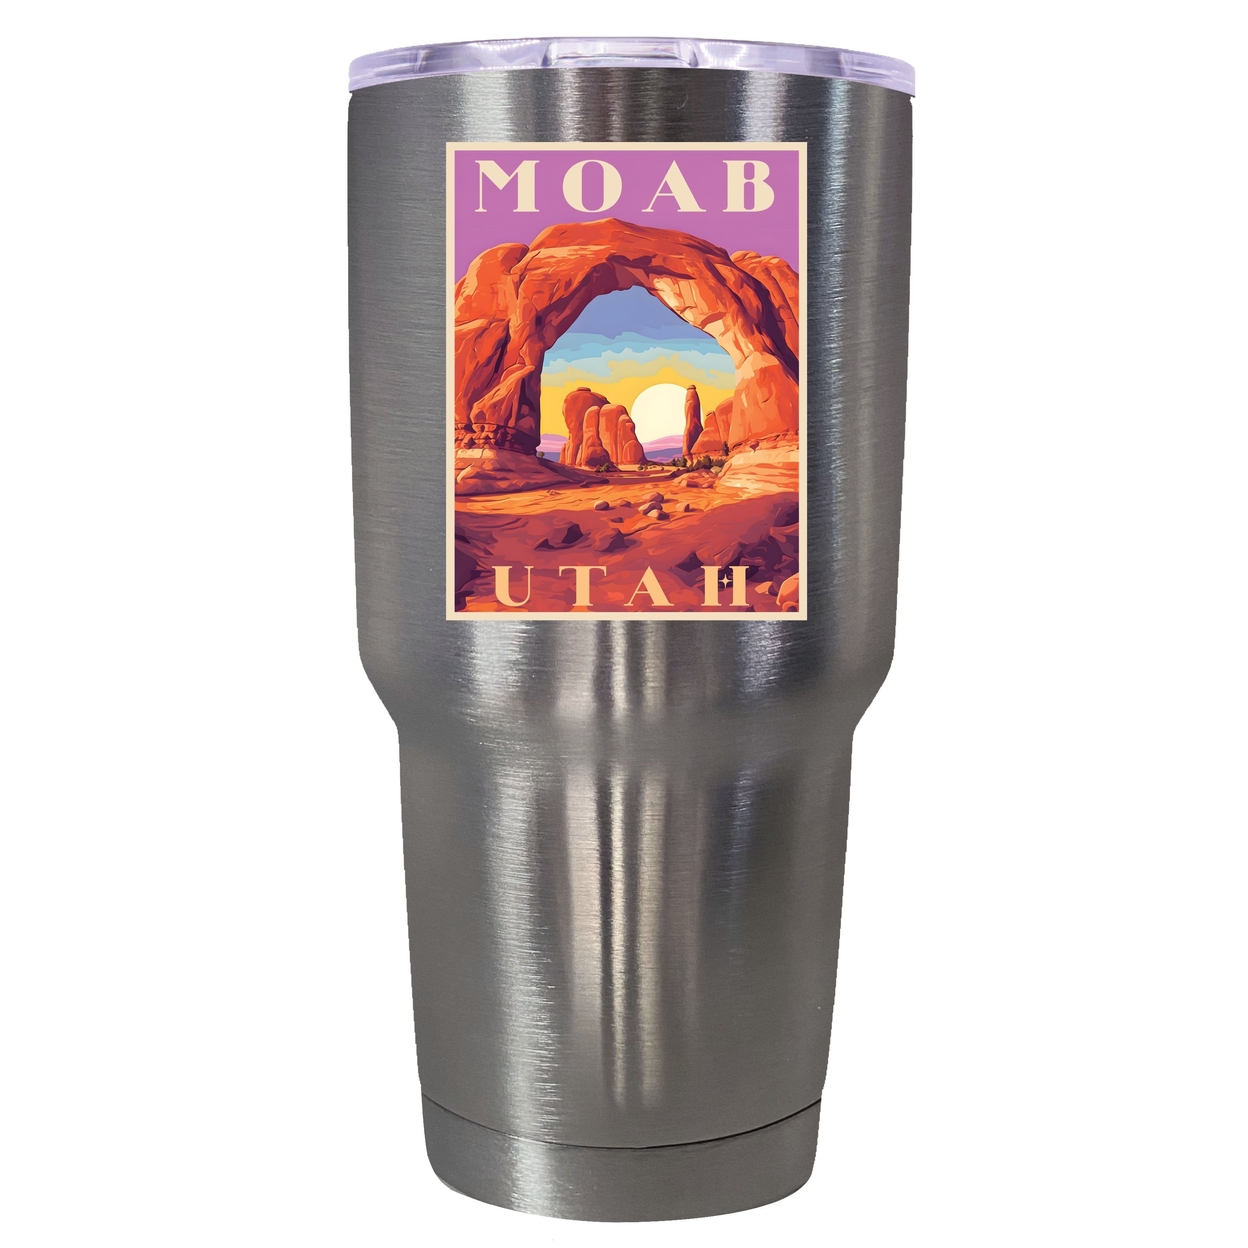 Moab Utah Souvenir 24 Oz Insulated Stainless Steel Tumbler - Stainless Steel,,2-Pack